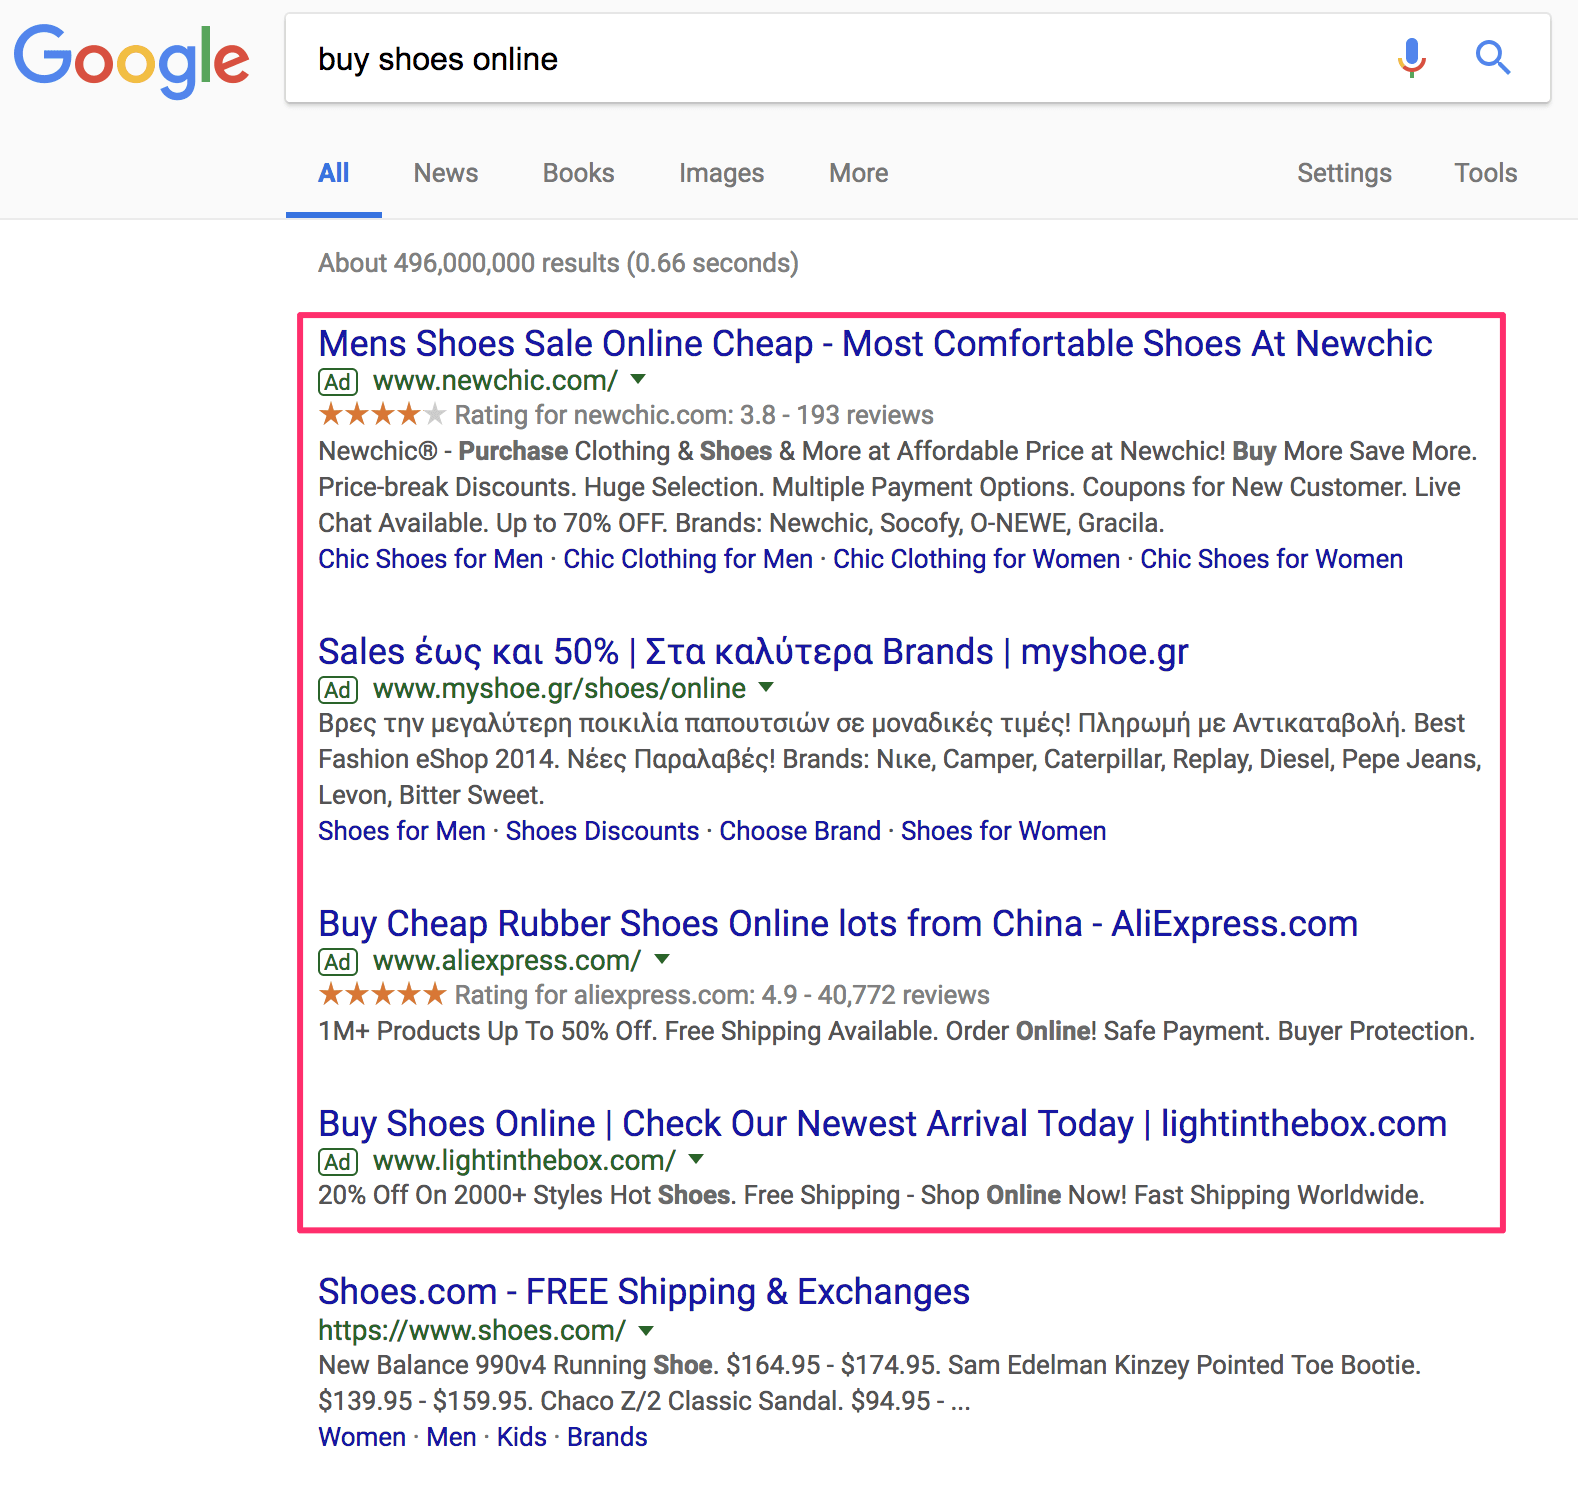 Adwords Ads in Google Search Results